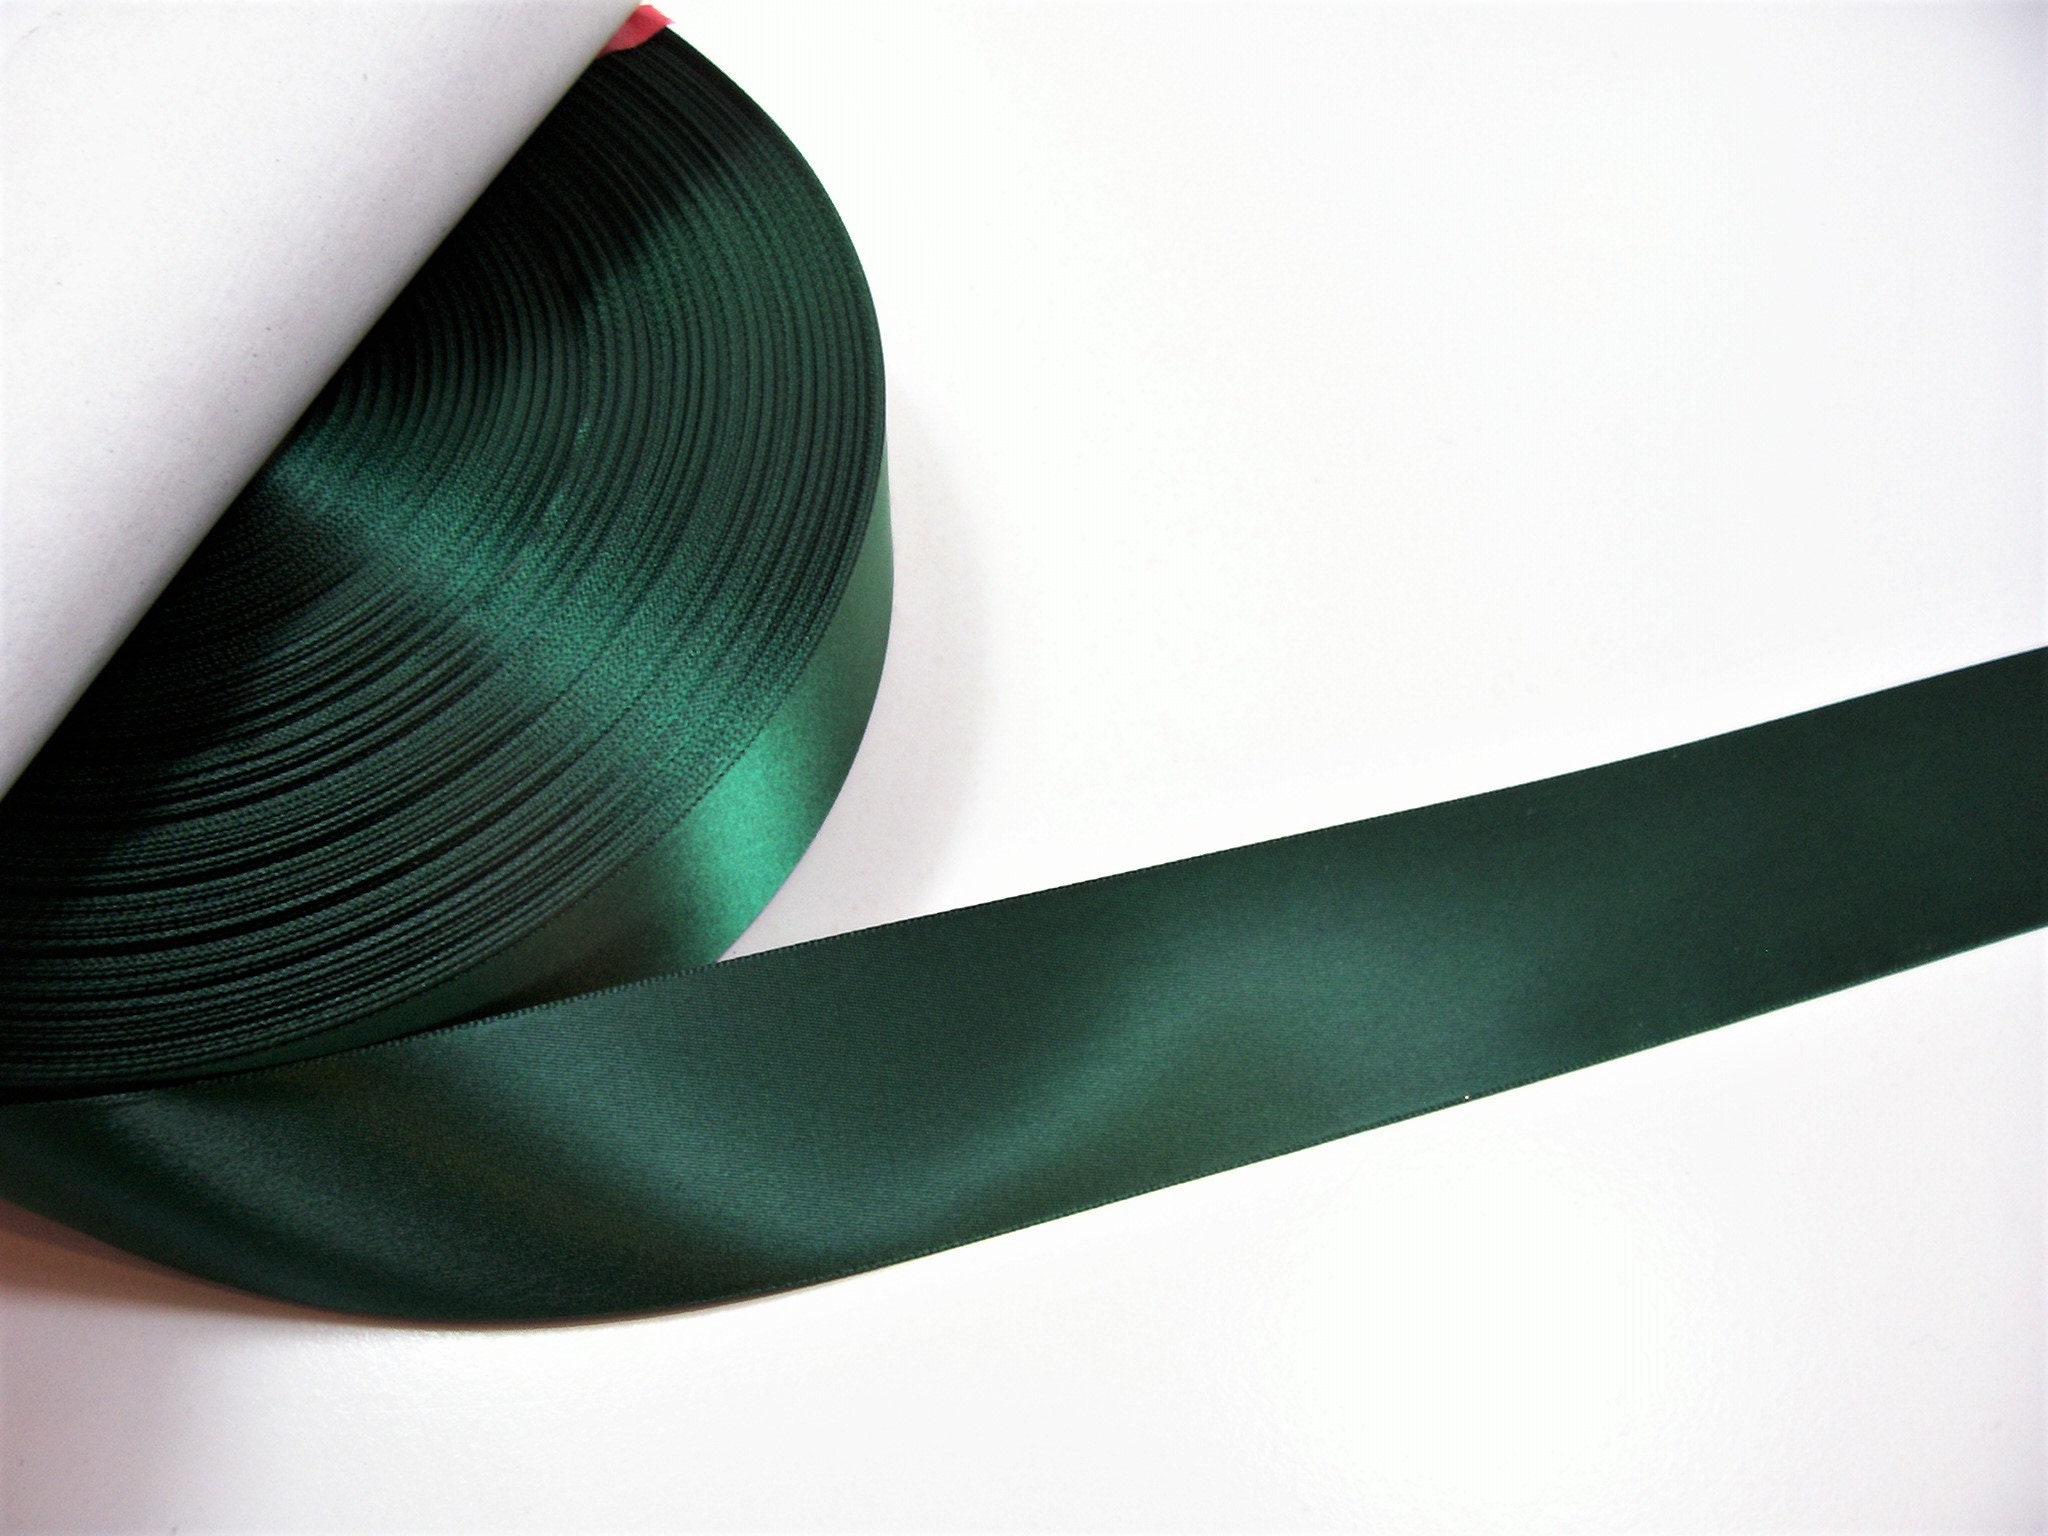 Solid Color Dark Green Satin Ribbon, 1-1/2 Inches x 25 Yards Fabric Satin Ribbon for Gift Wrapping, Crafts, Hair Bows Making, Wreath, Wedding Party